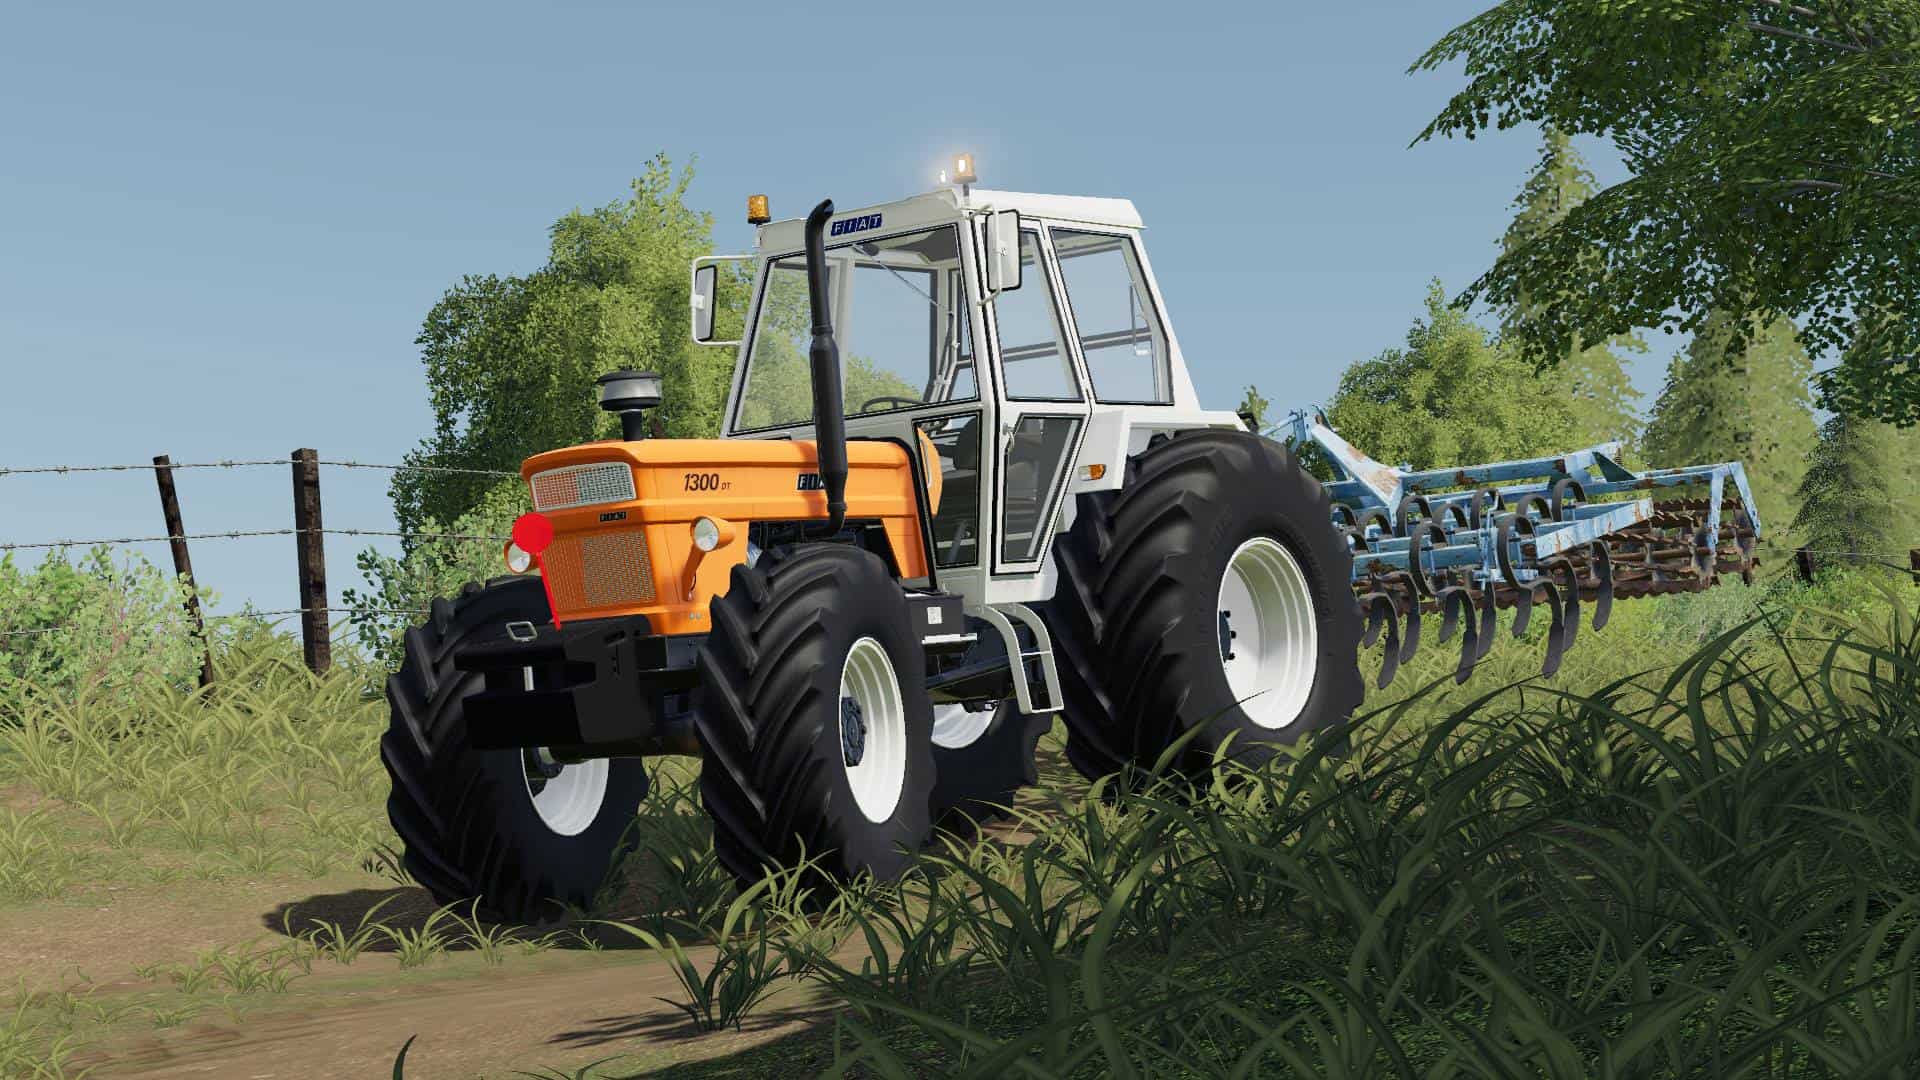 FIAT 1300 DT / FS 20 / Indian tractor mod, Empire